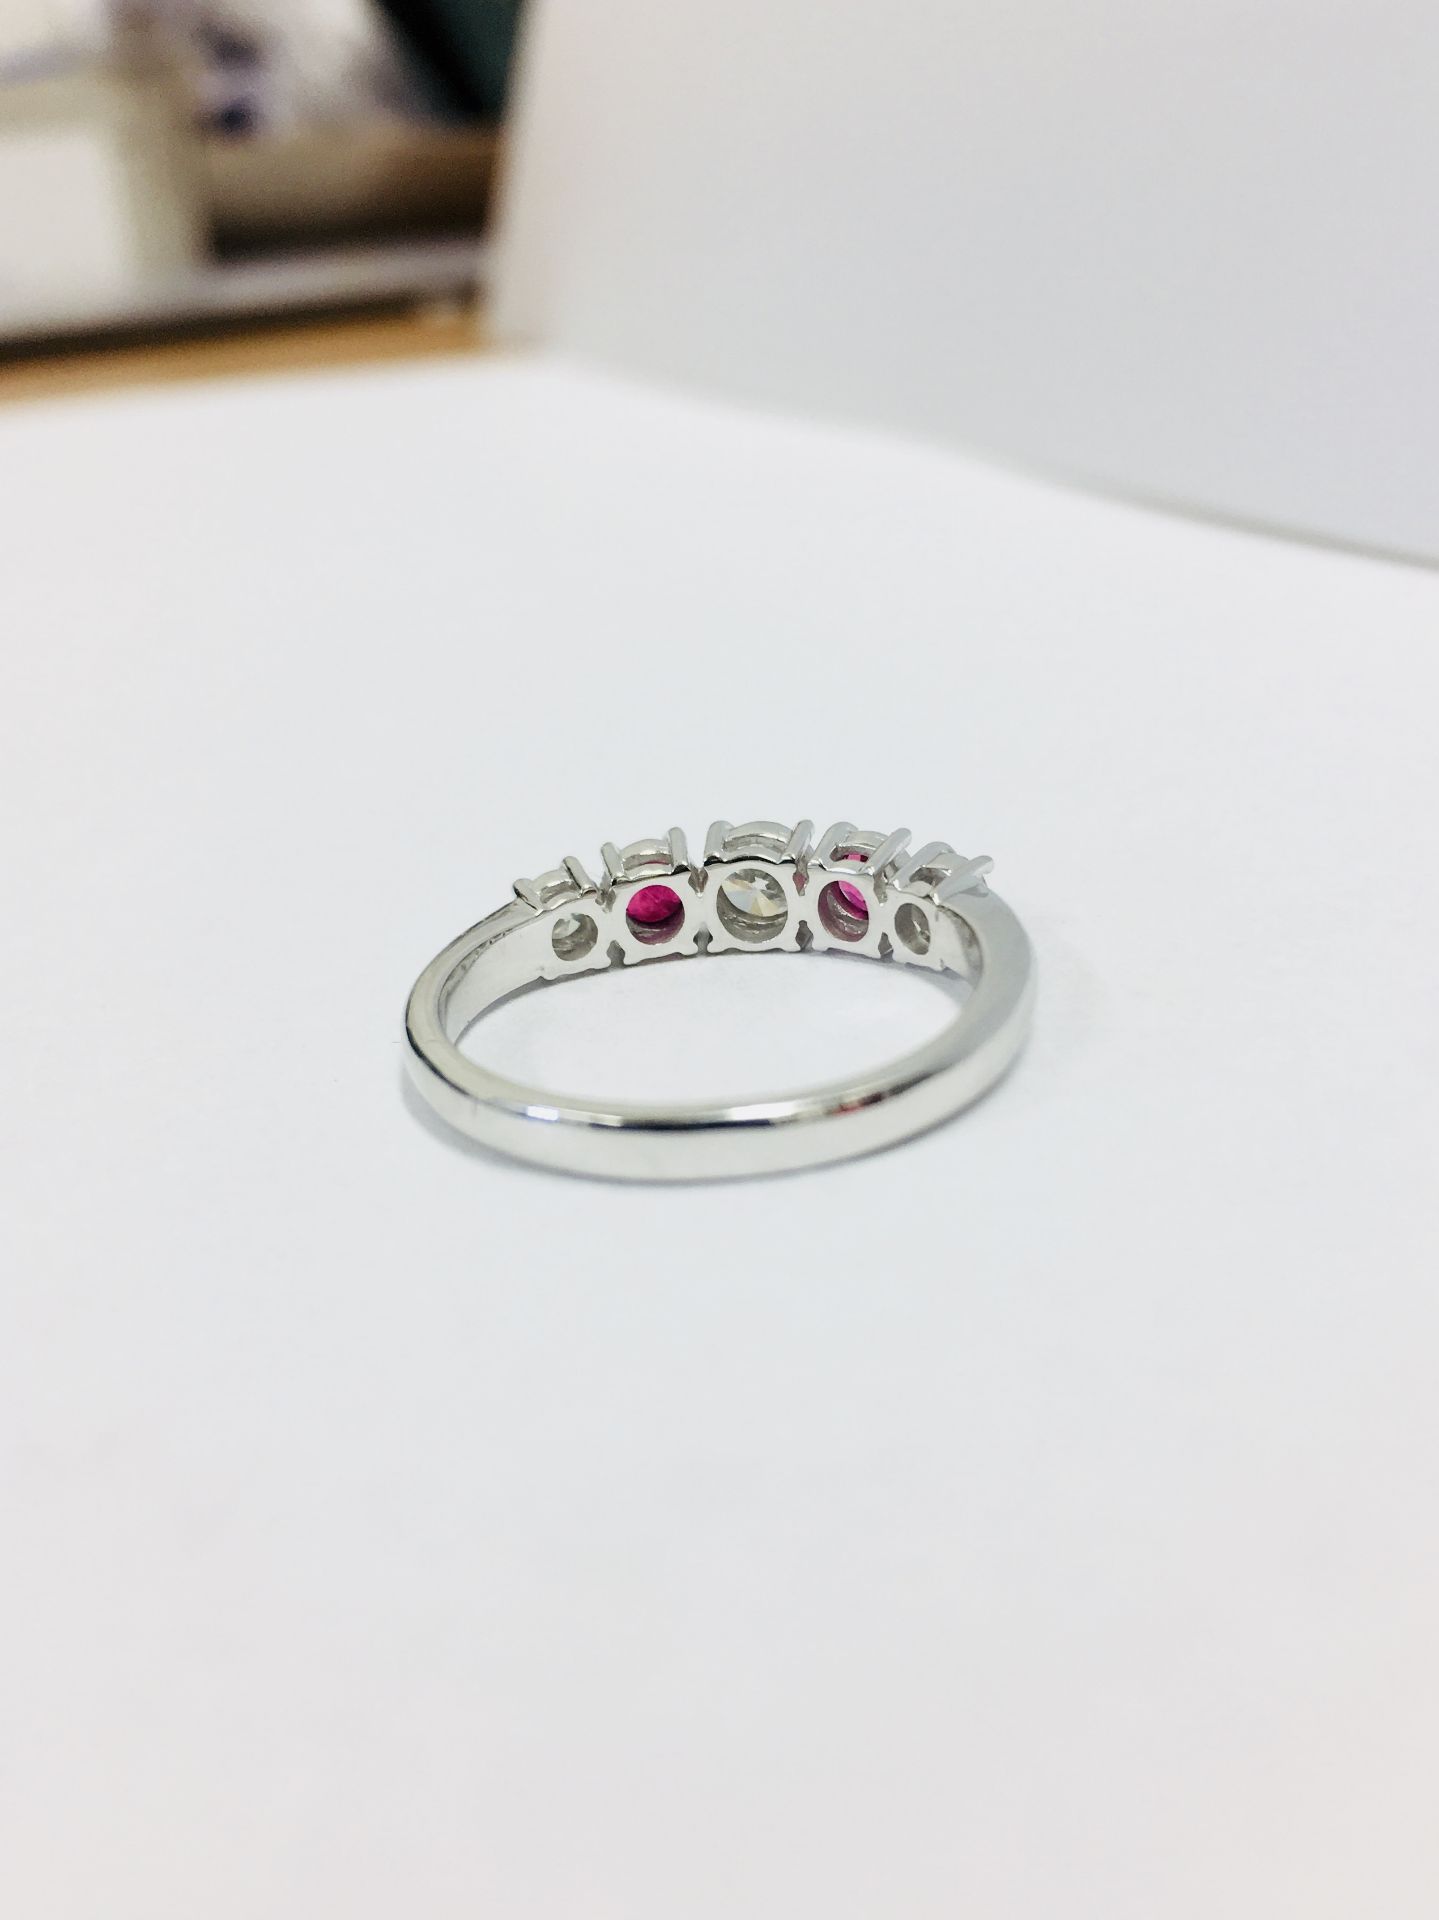 0.75Ct Ruby And Diamond Five Stone Ringset In 18Ct Gold. - Image 4 of 7